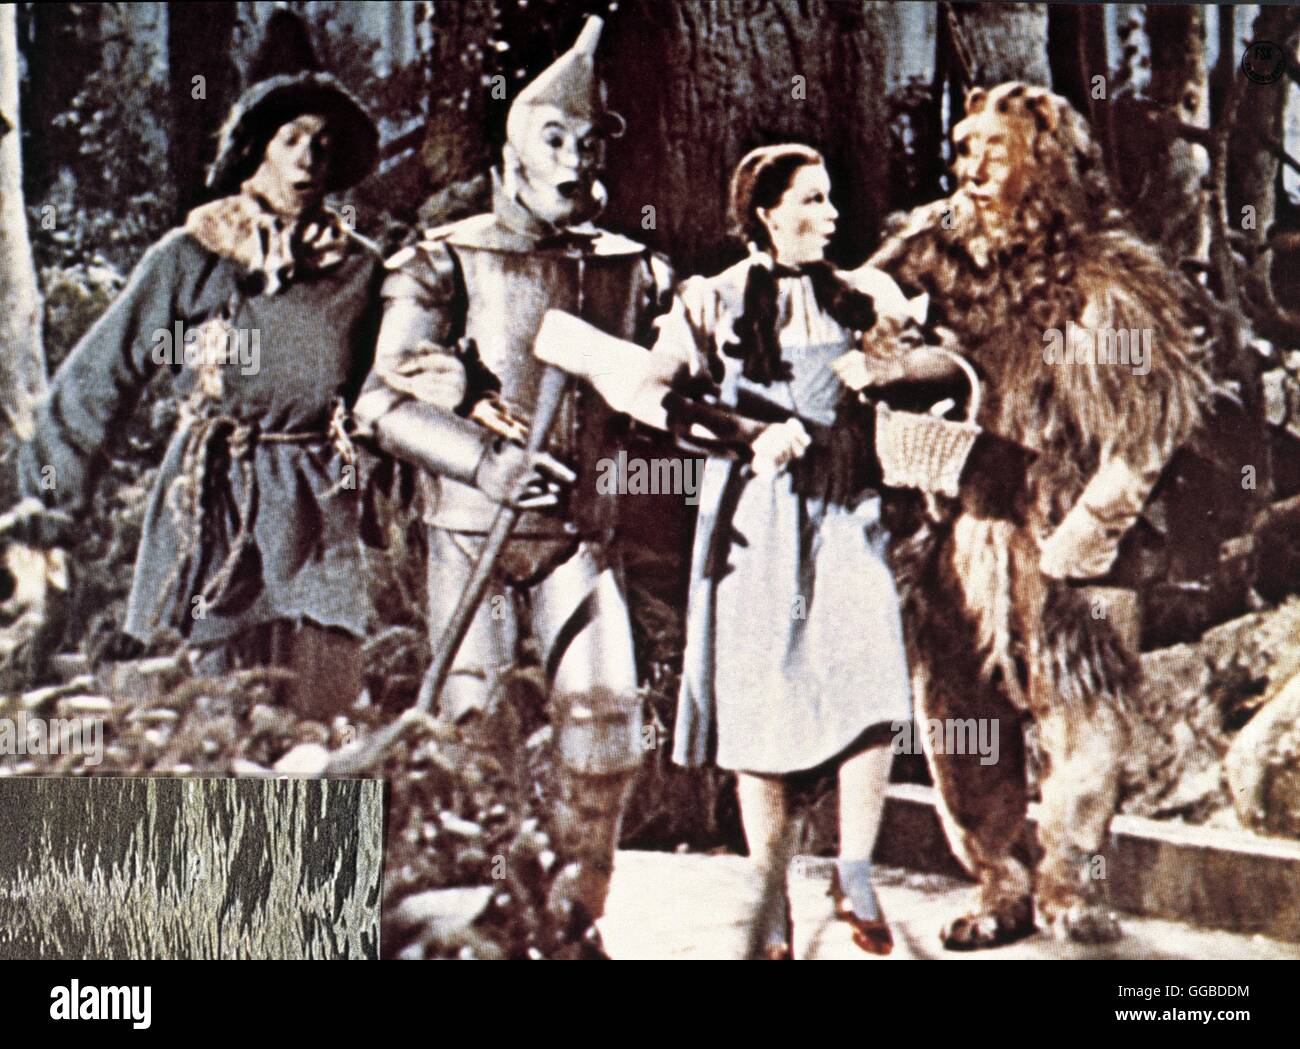 THE WIZZARD OF OZ USA 1939 Hunk the Scare Crow (RAY BOLGER), Hickory the Tin Man (JACK HALEY), Dorothy (JUDY GARLAND), Zeke the Cowardly Lion (BERT LAHR) Stock Photo